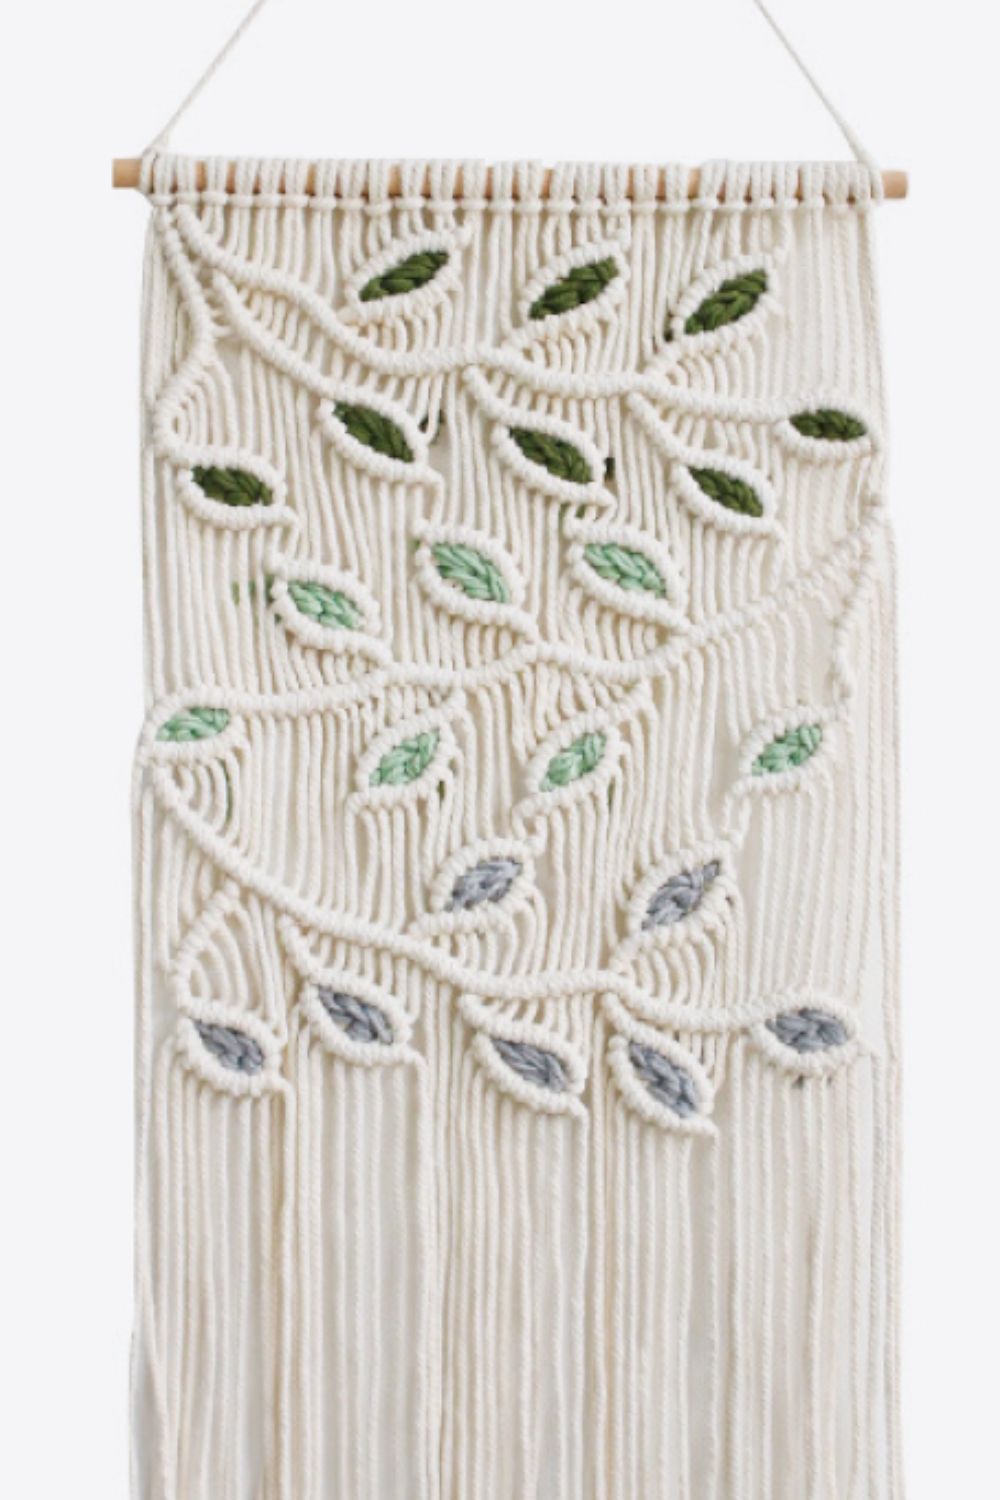 Contrast Leaf Fringe Macrame Wall Hanging Print on any thing USA/STOD clothes